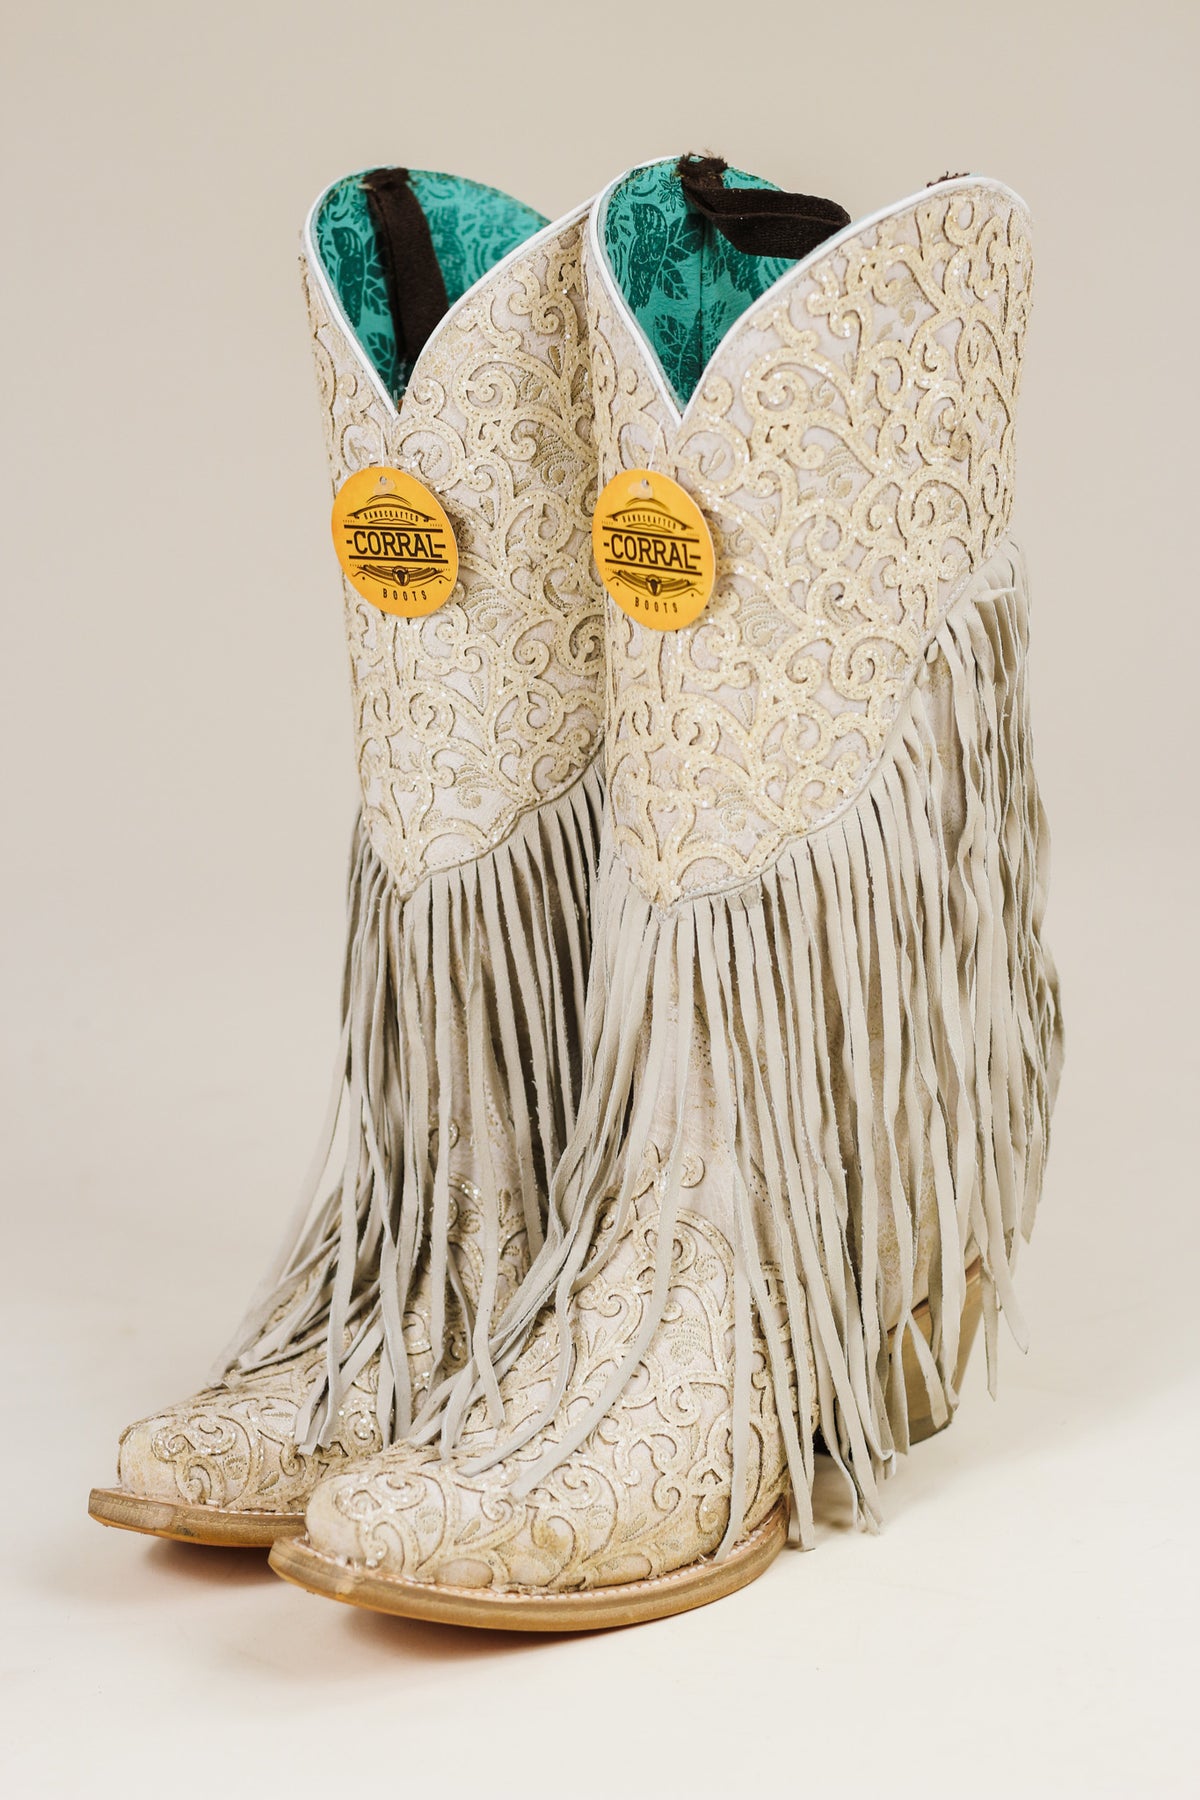 White Leather Fringe Cowgirl Boots By Corral